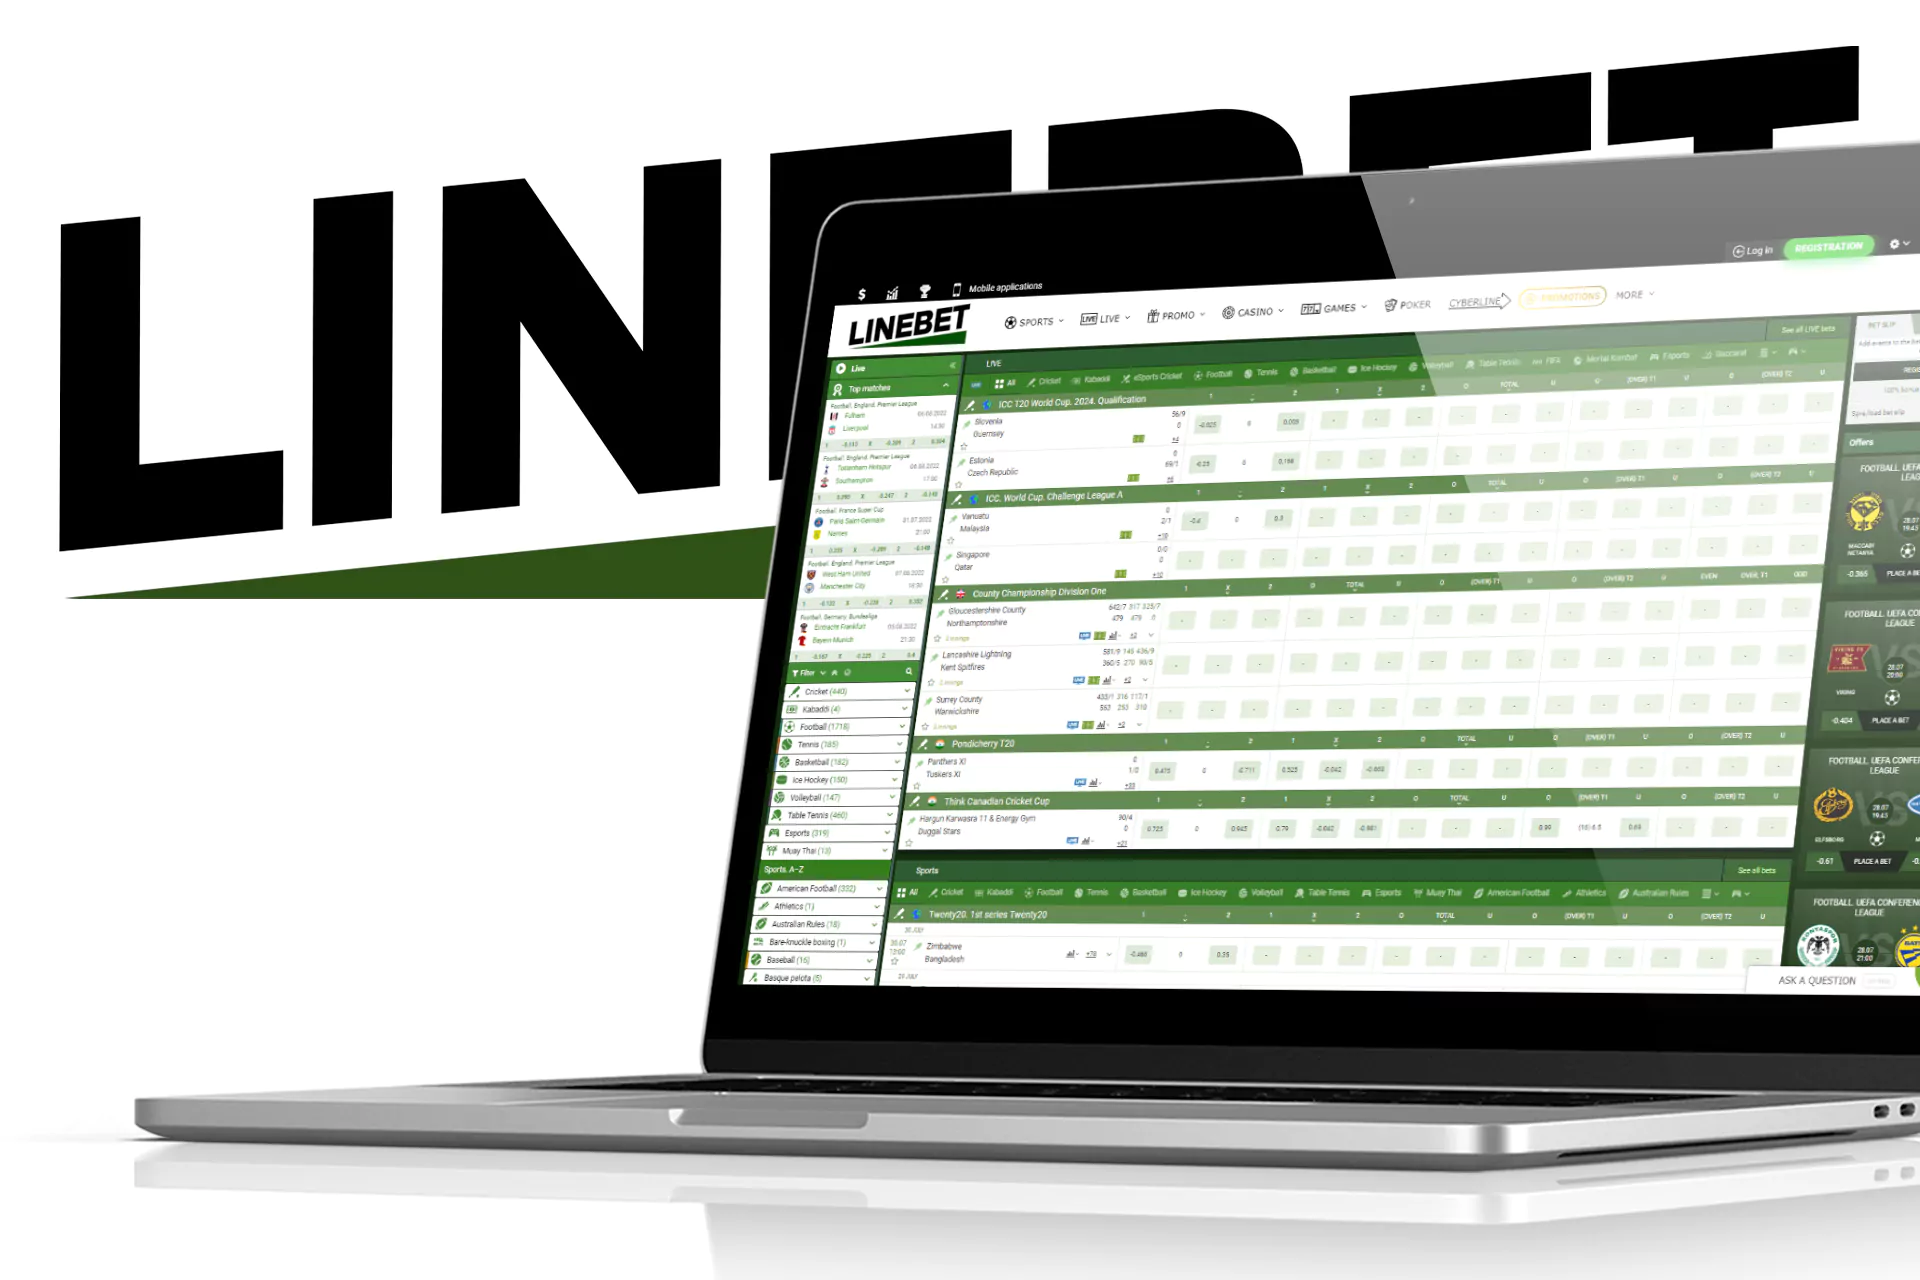 To start betting, you should create an account at Linebet.